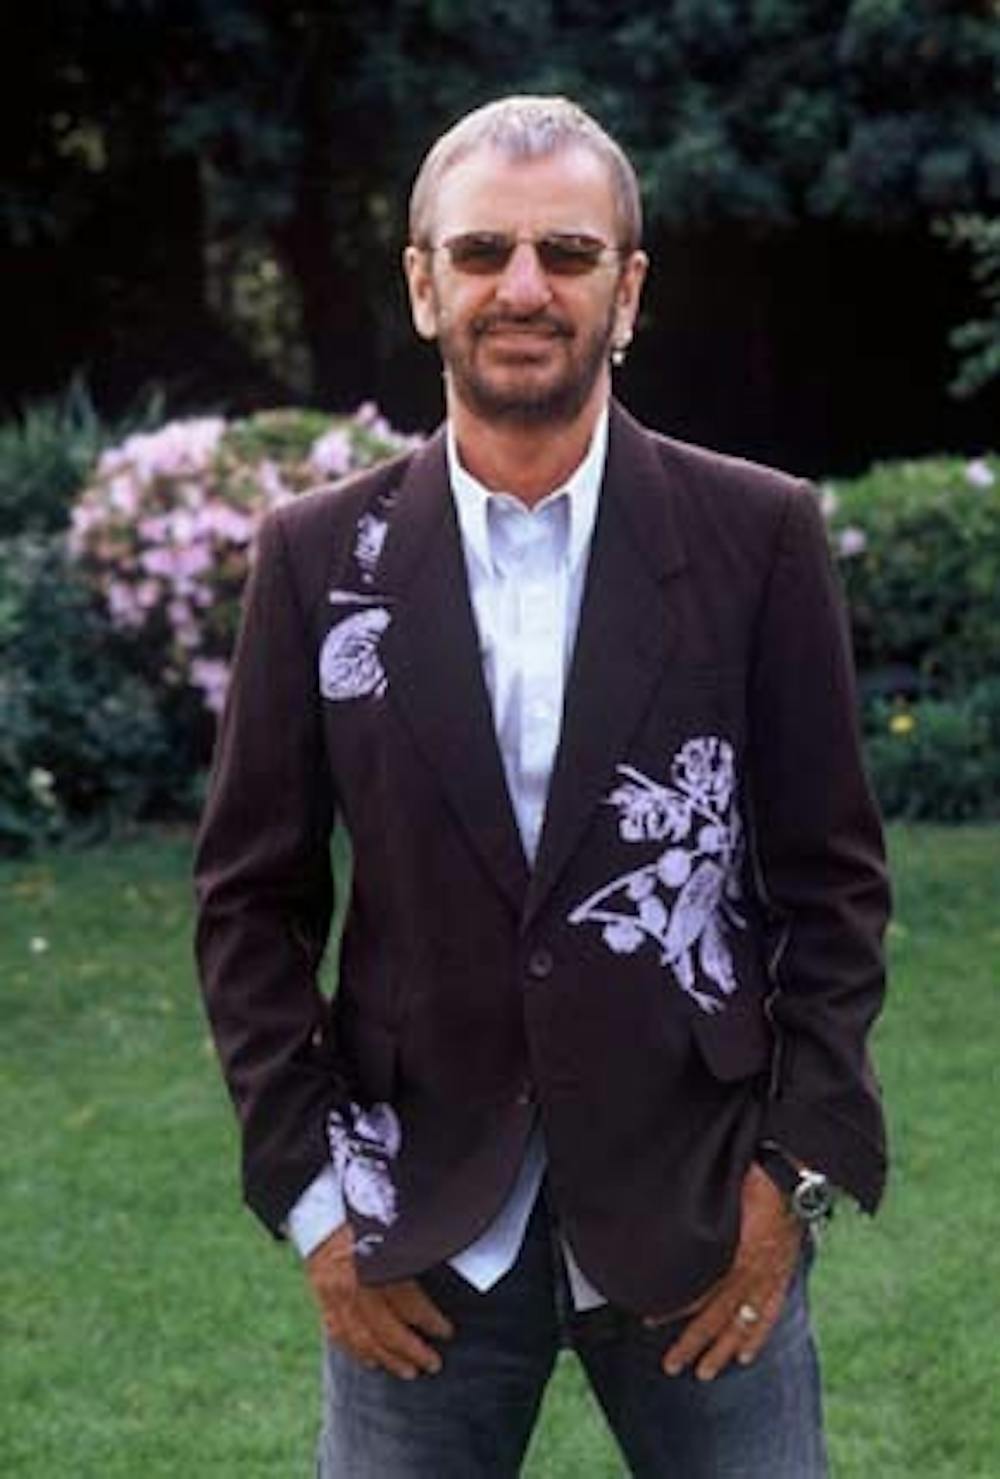 Ringo can't believe that his latest album was better than Paul's.